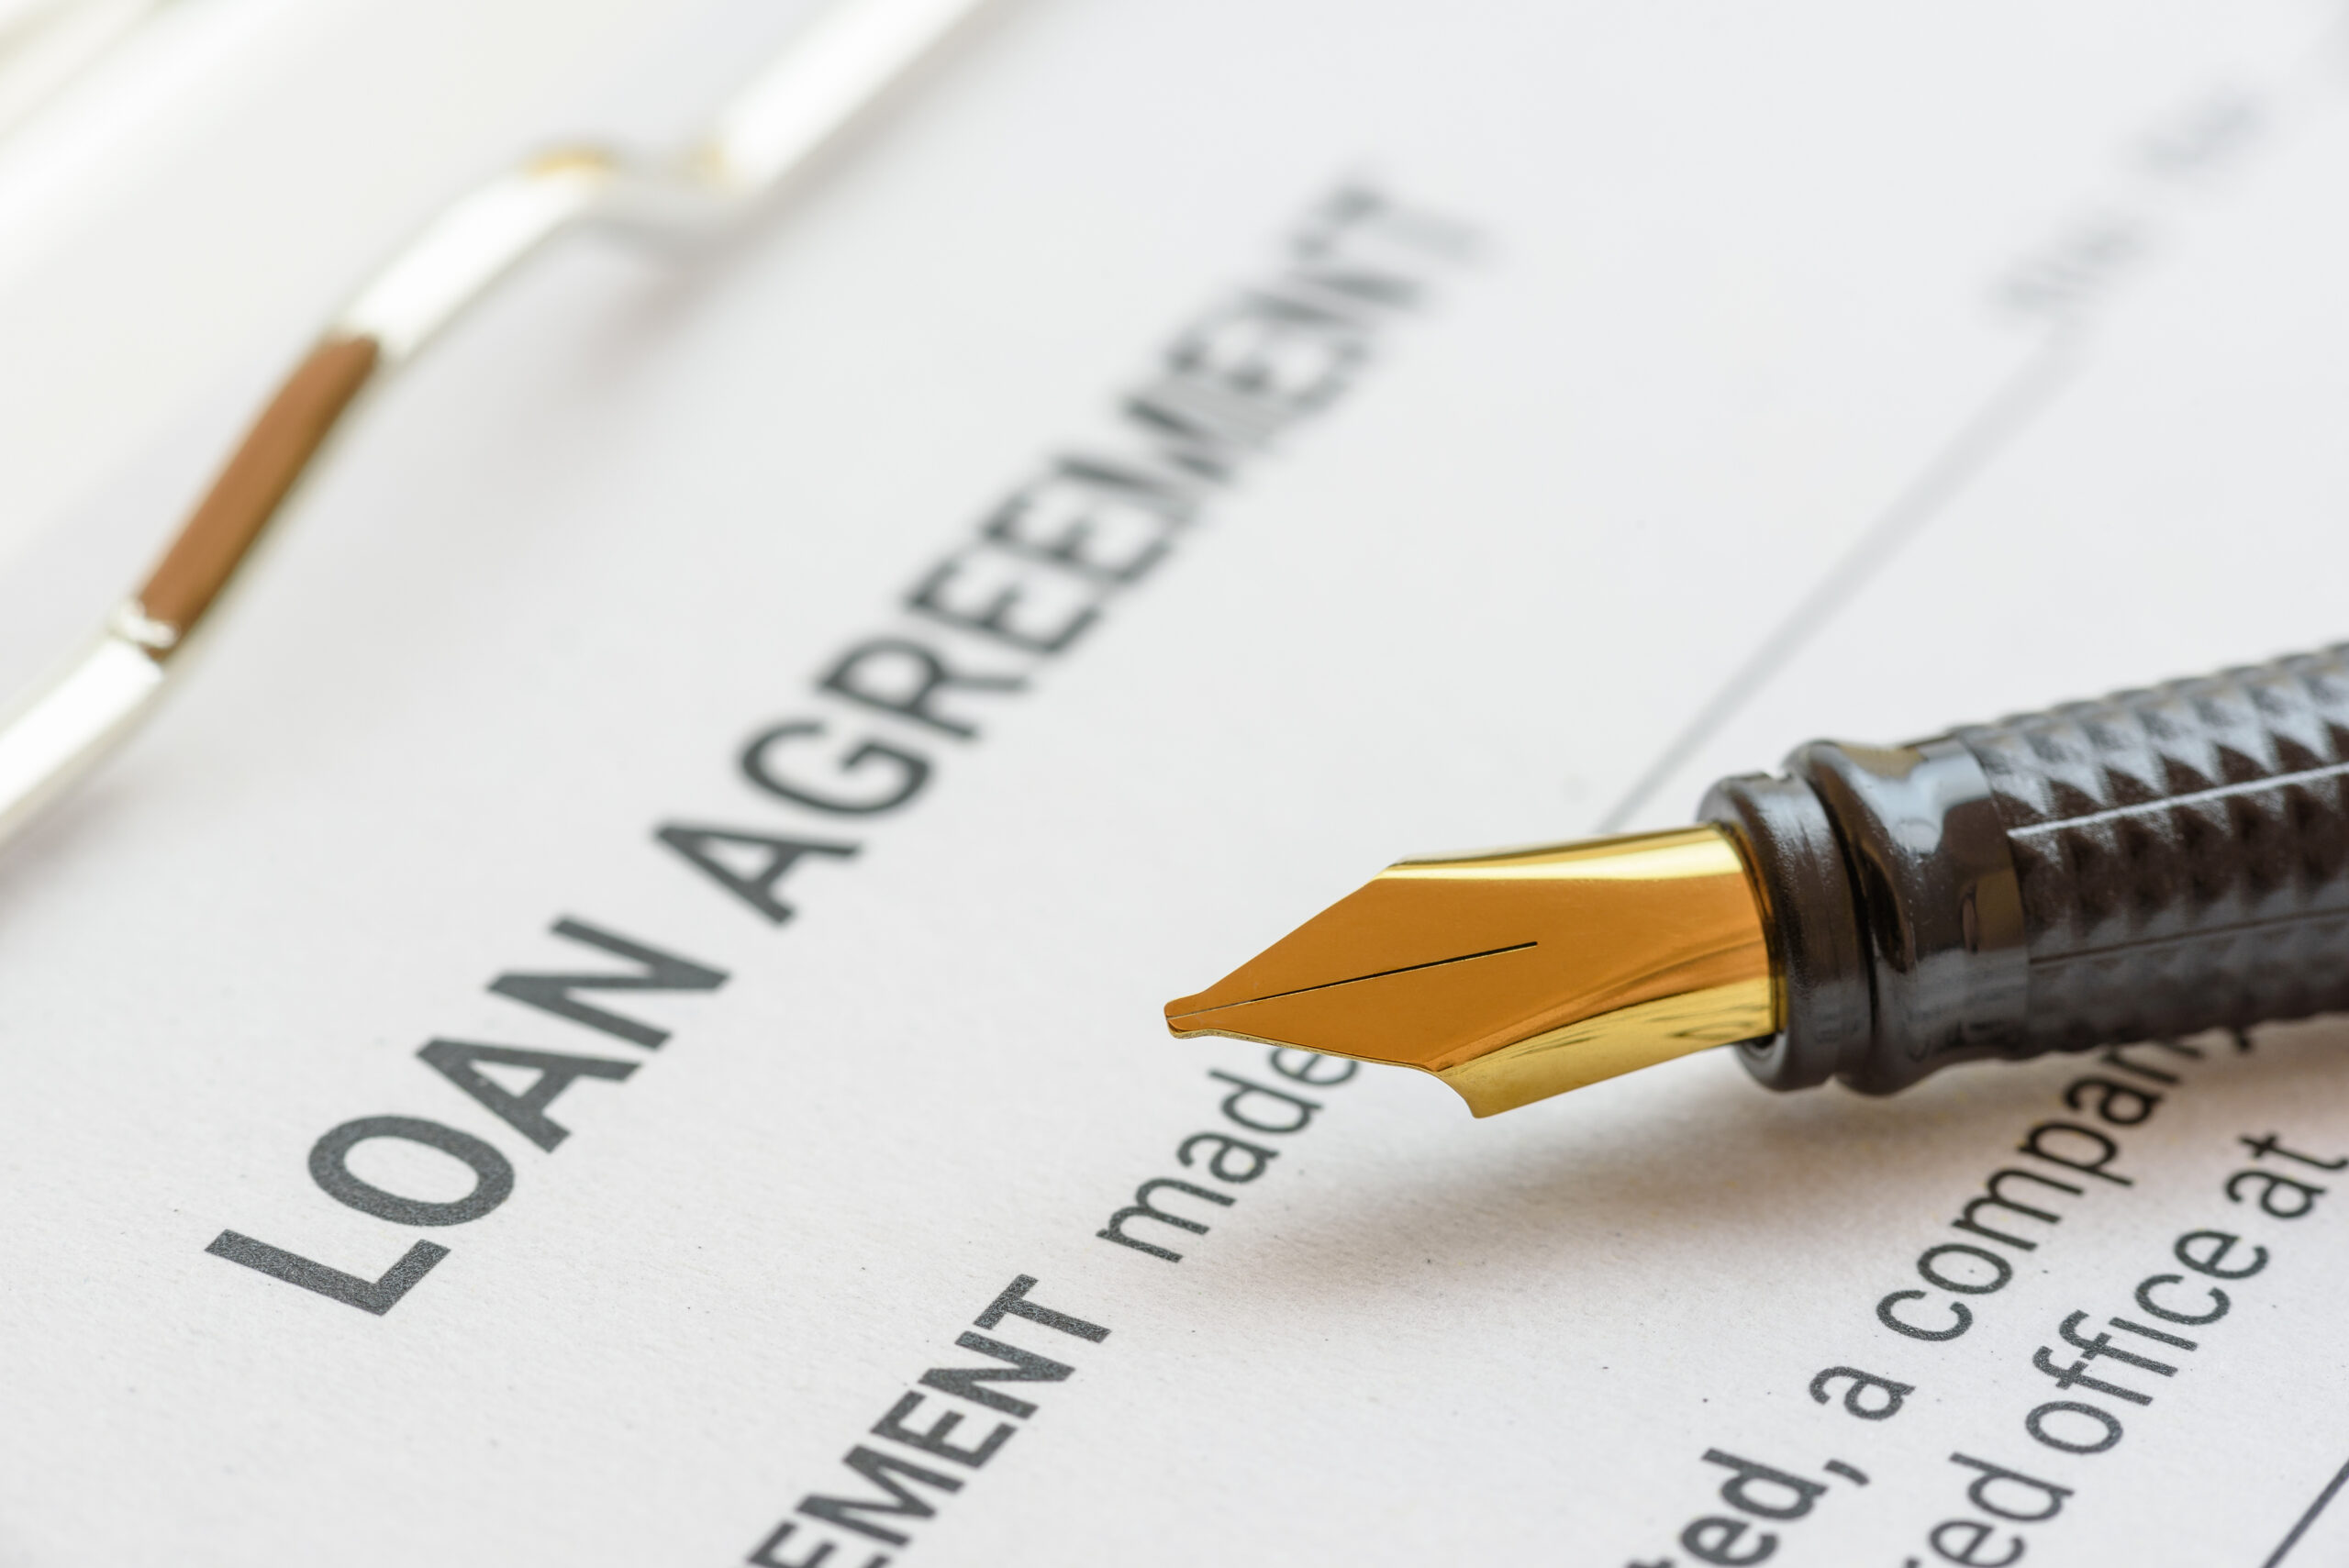 Loan agreement or legal document concept : Fountain pen on a loan agreement paper form. Loan agreement is a contract between a borrower and a lender, a compilation of various mutual promises.